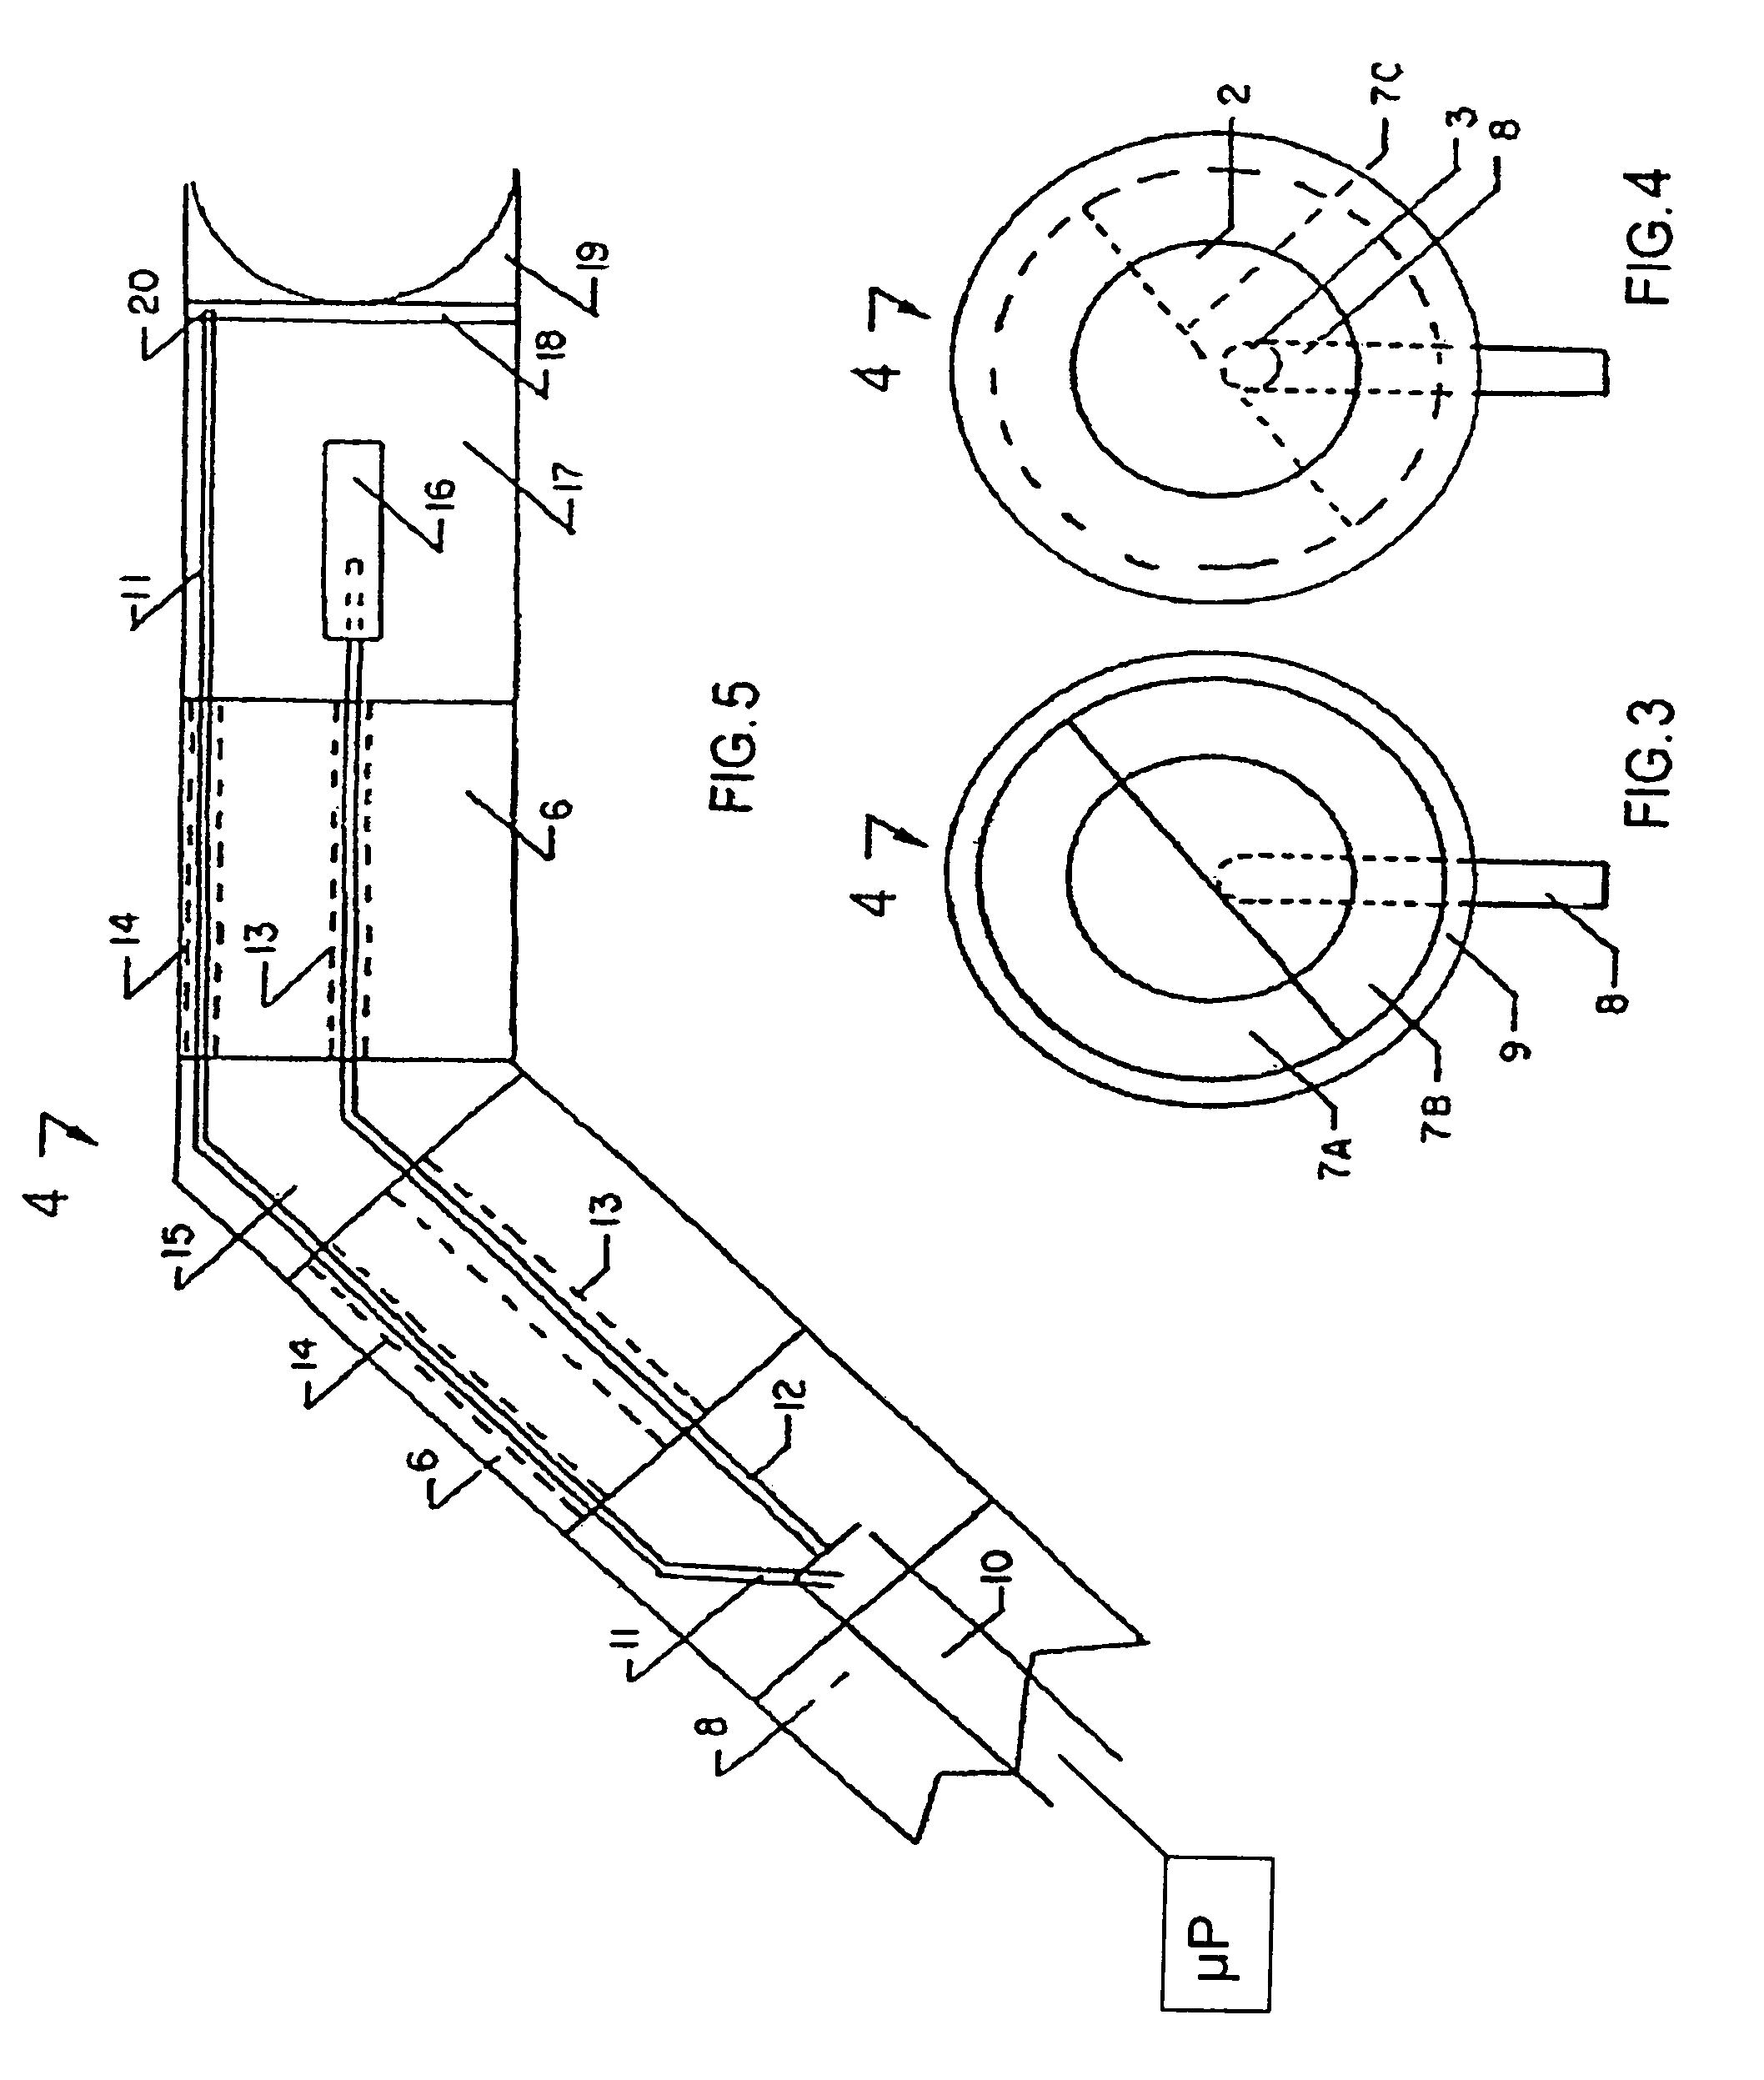 Combined applanation tonometer and ultrasonic pachymeter